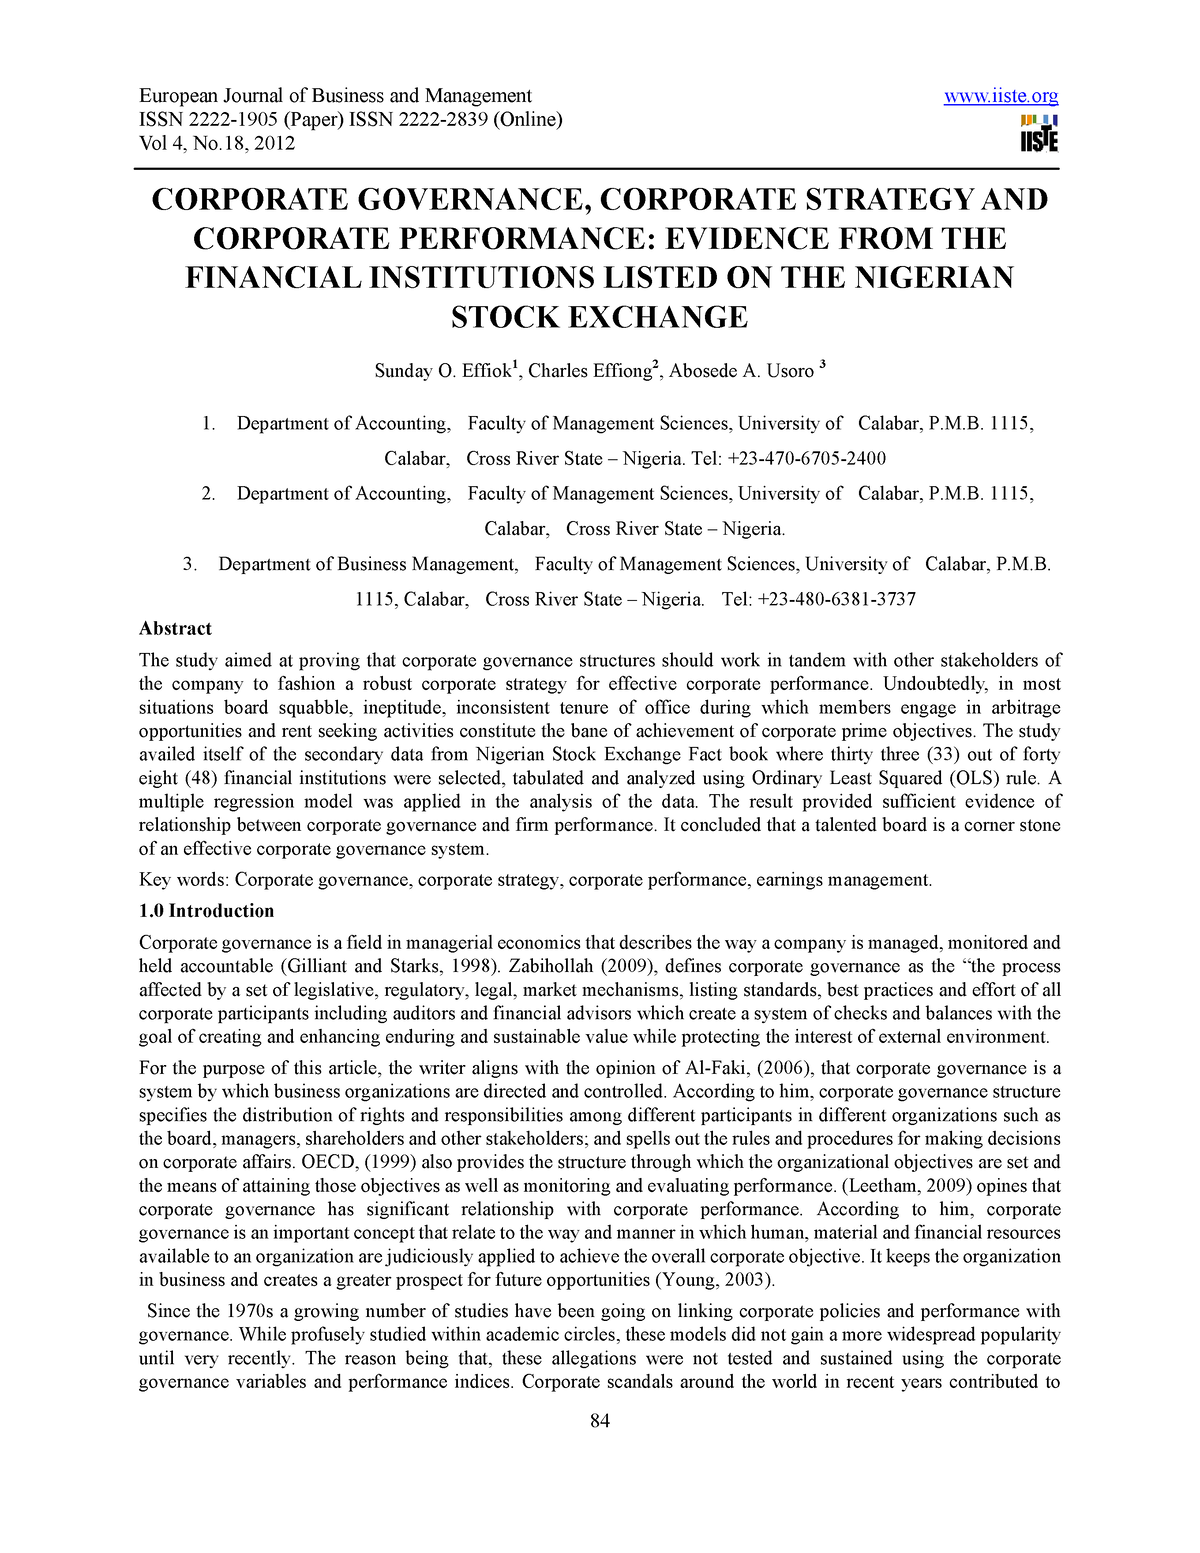 corporate governance and financial performance thesis